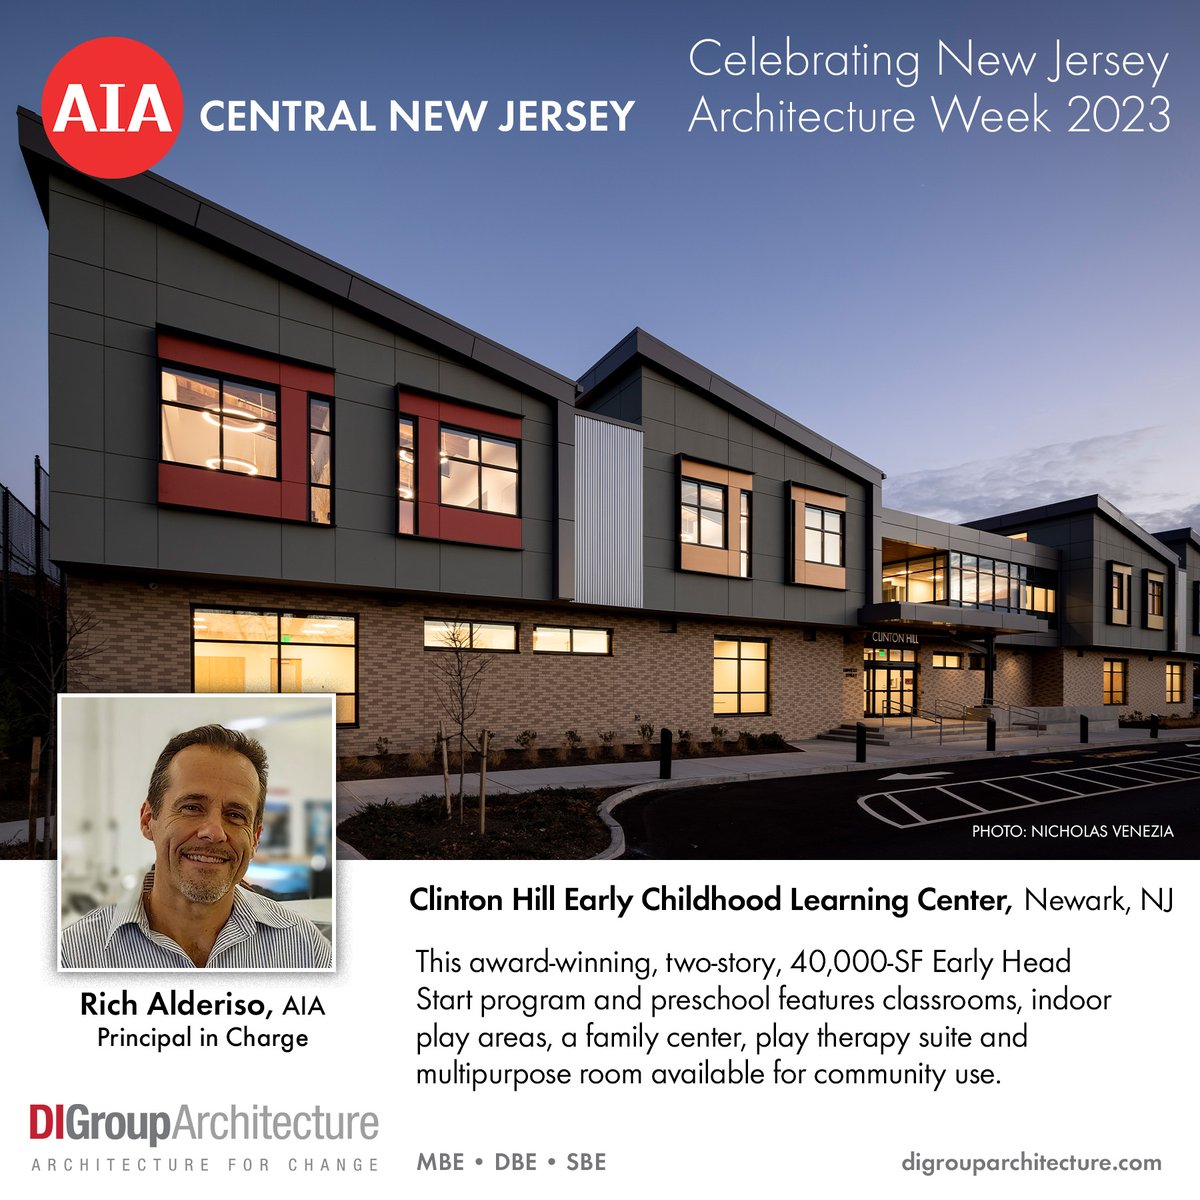 @DIGroupArch Rules the #Schools for New Jersey Architecture Week! #schooldesign #earlylearning #designforeducation #schoolarchitect #k12education #njarchitecture #NJARCHITECTS #NJ #NewJersey #njarchweek23 #AIANJ #AIAarchitects #aianjarchitects #architects #architecture @AIACNJ